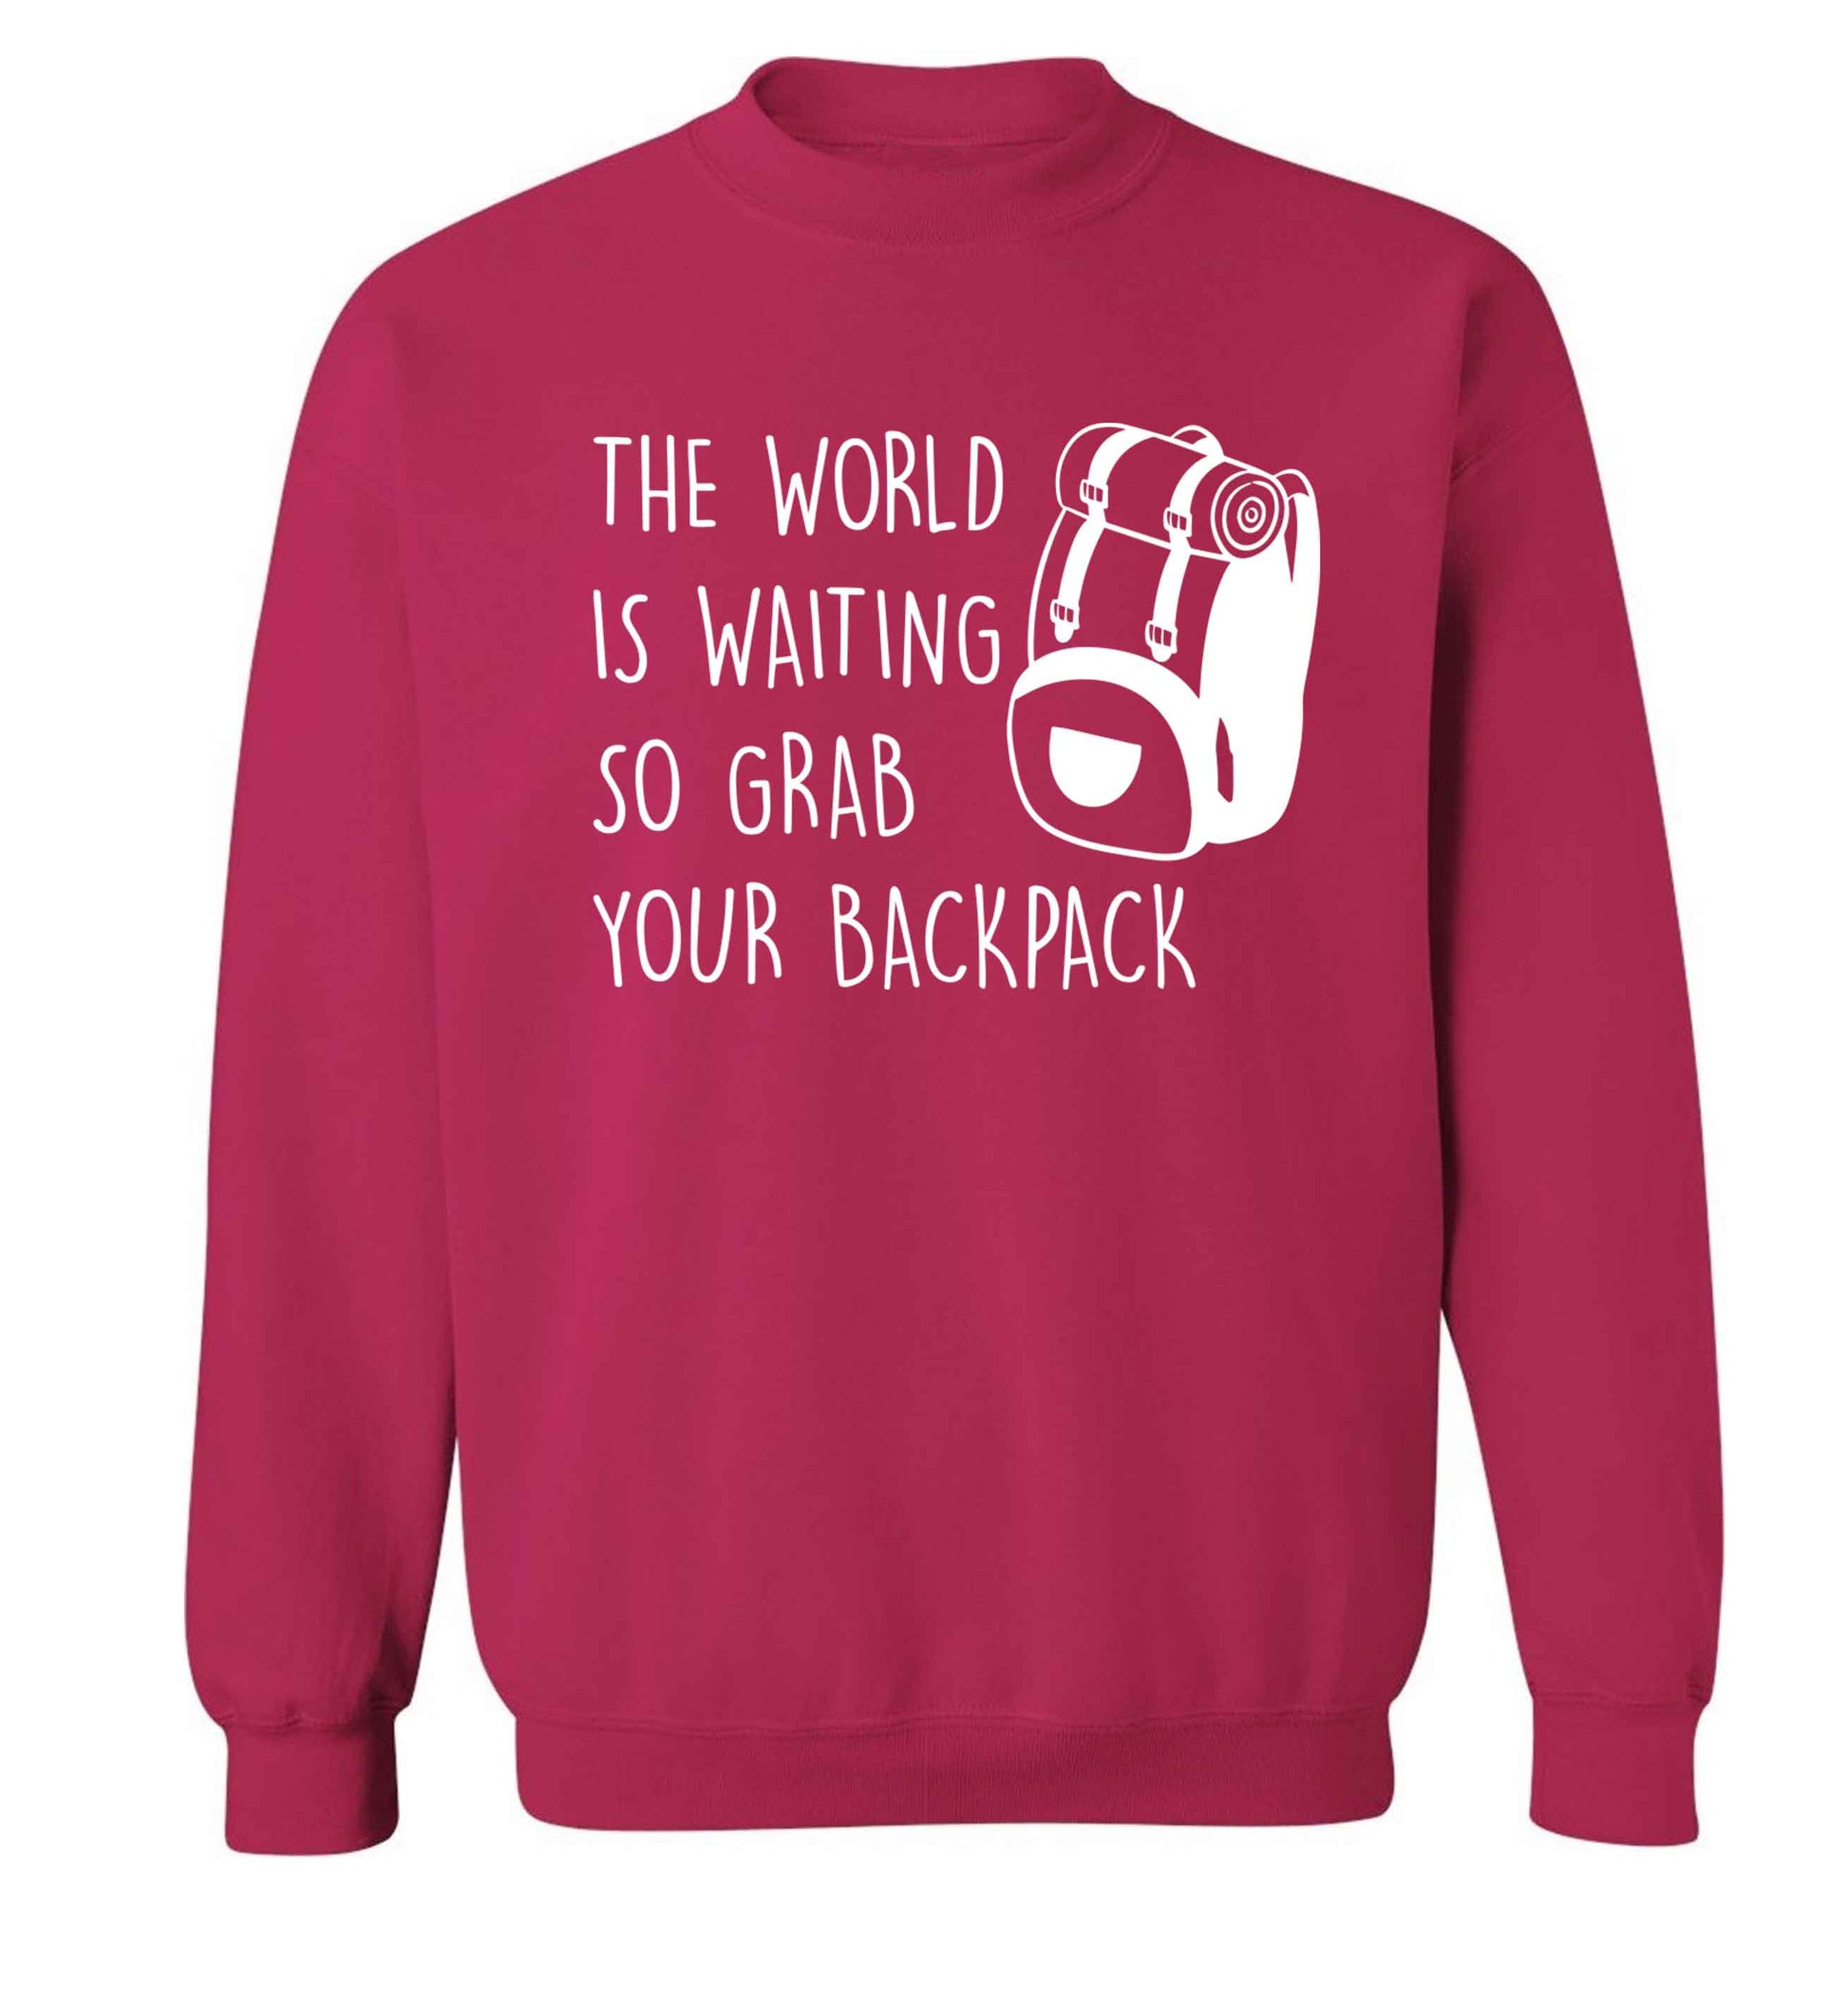 The world is waiting so grab your backpack Adult's unisex pink Sweater 2XL